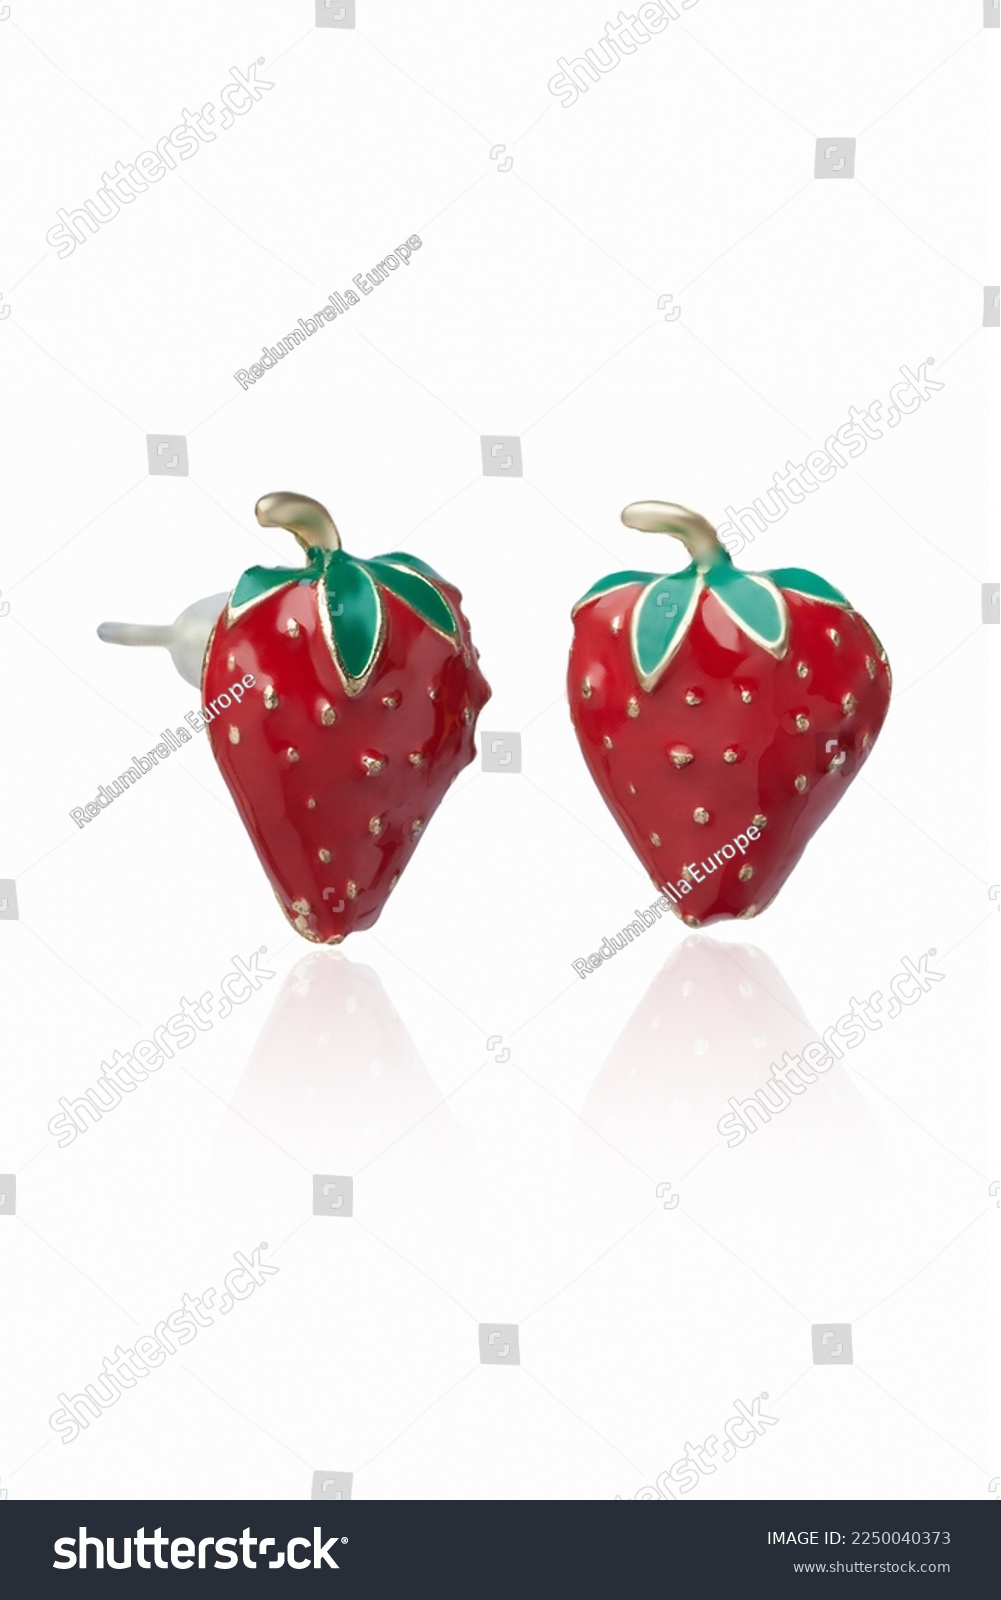 Subject shot of golden stud earrings made as strawberries decorated with bright colored enamel. The original earrings are isolated on the white background. Vogue accessory for ladies and girls. #2250040373